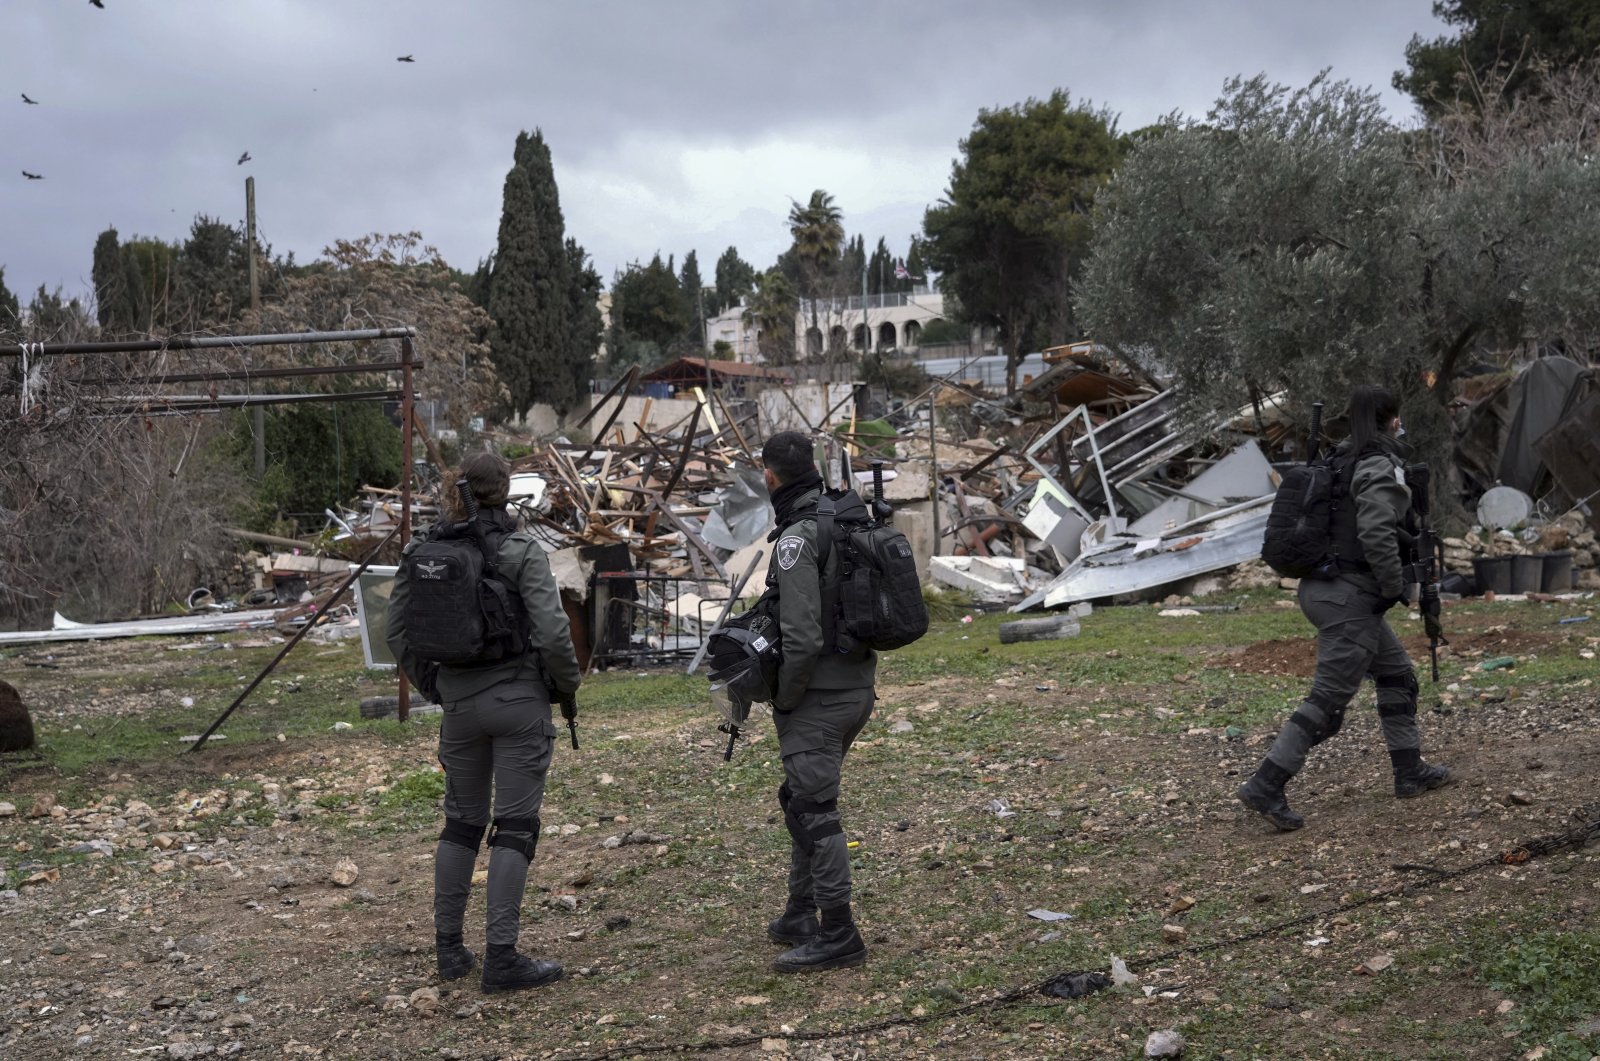 Israeli forces stand next to the ruins of a Palestinian house demolished by the Jerusalem municipality, in the neighborhood of Sheikh Jarrah, East Jerusalem, occupied Palestine, Jan. 19, 2022. (AP Photo)